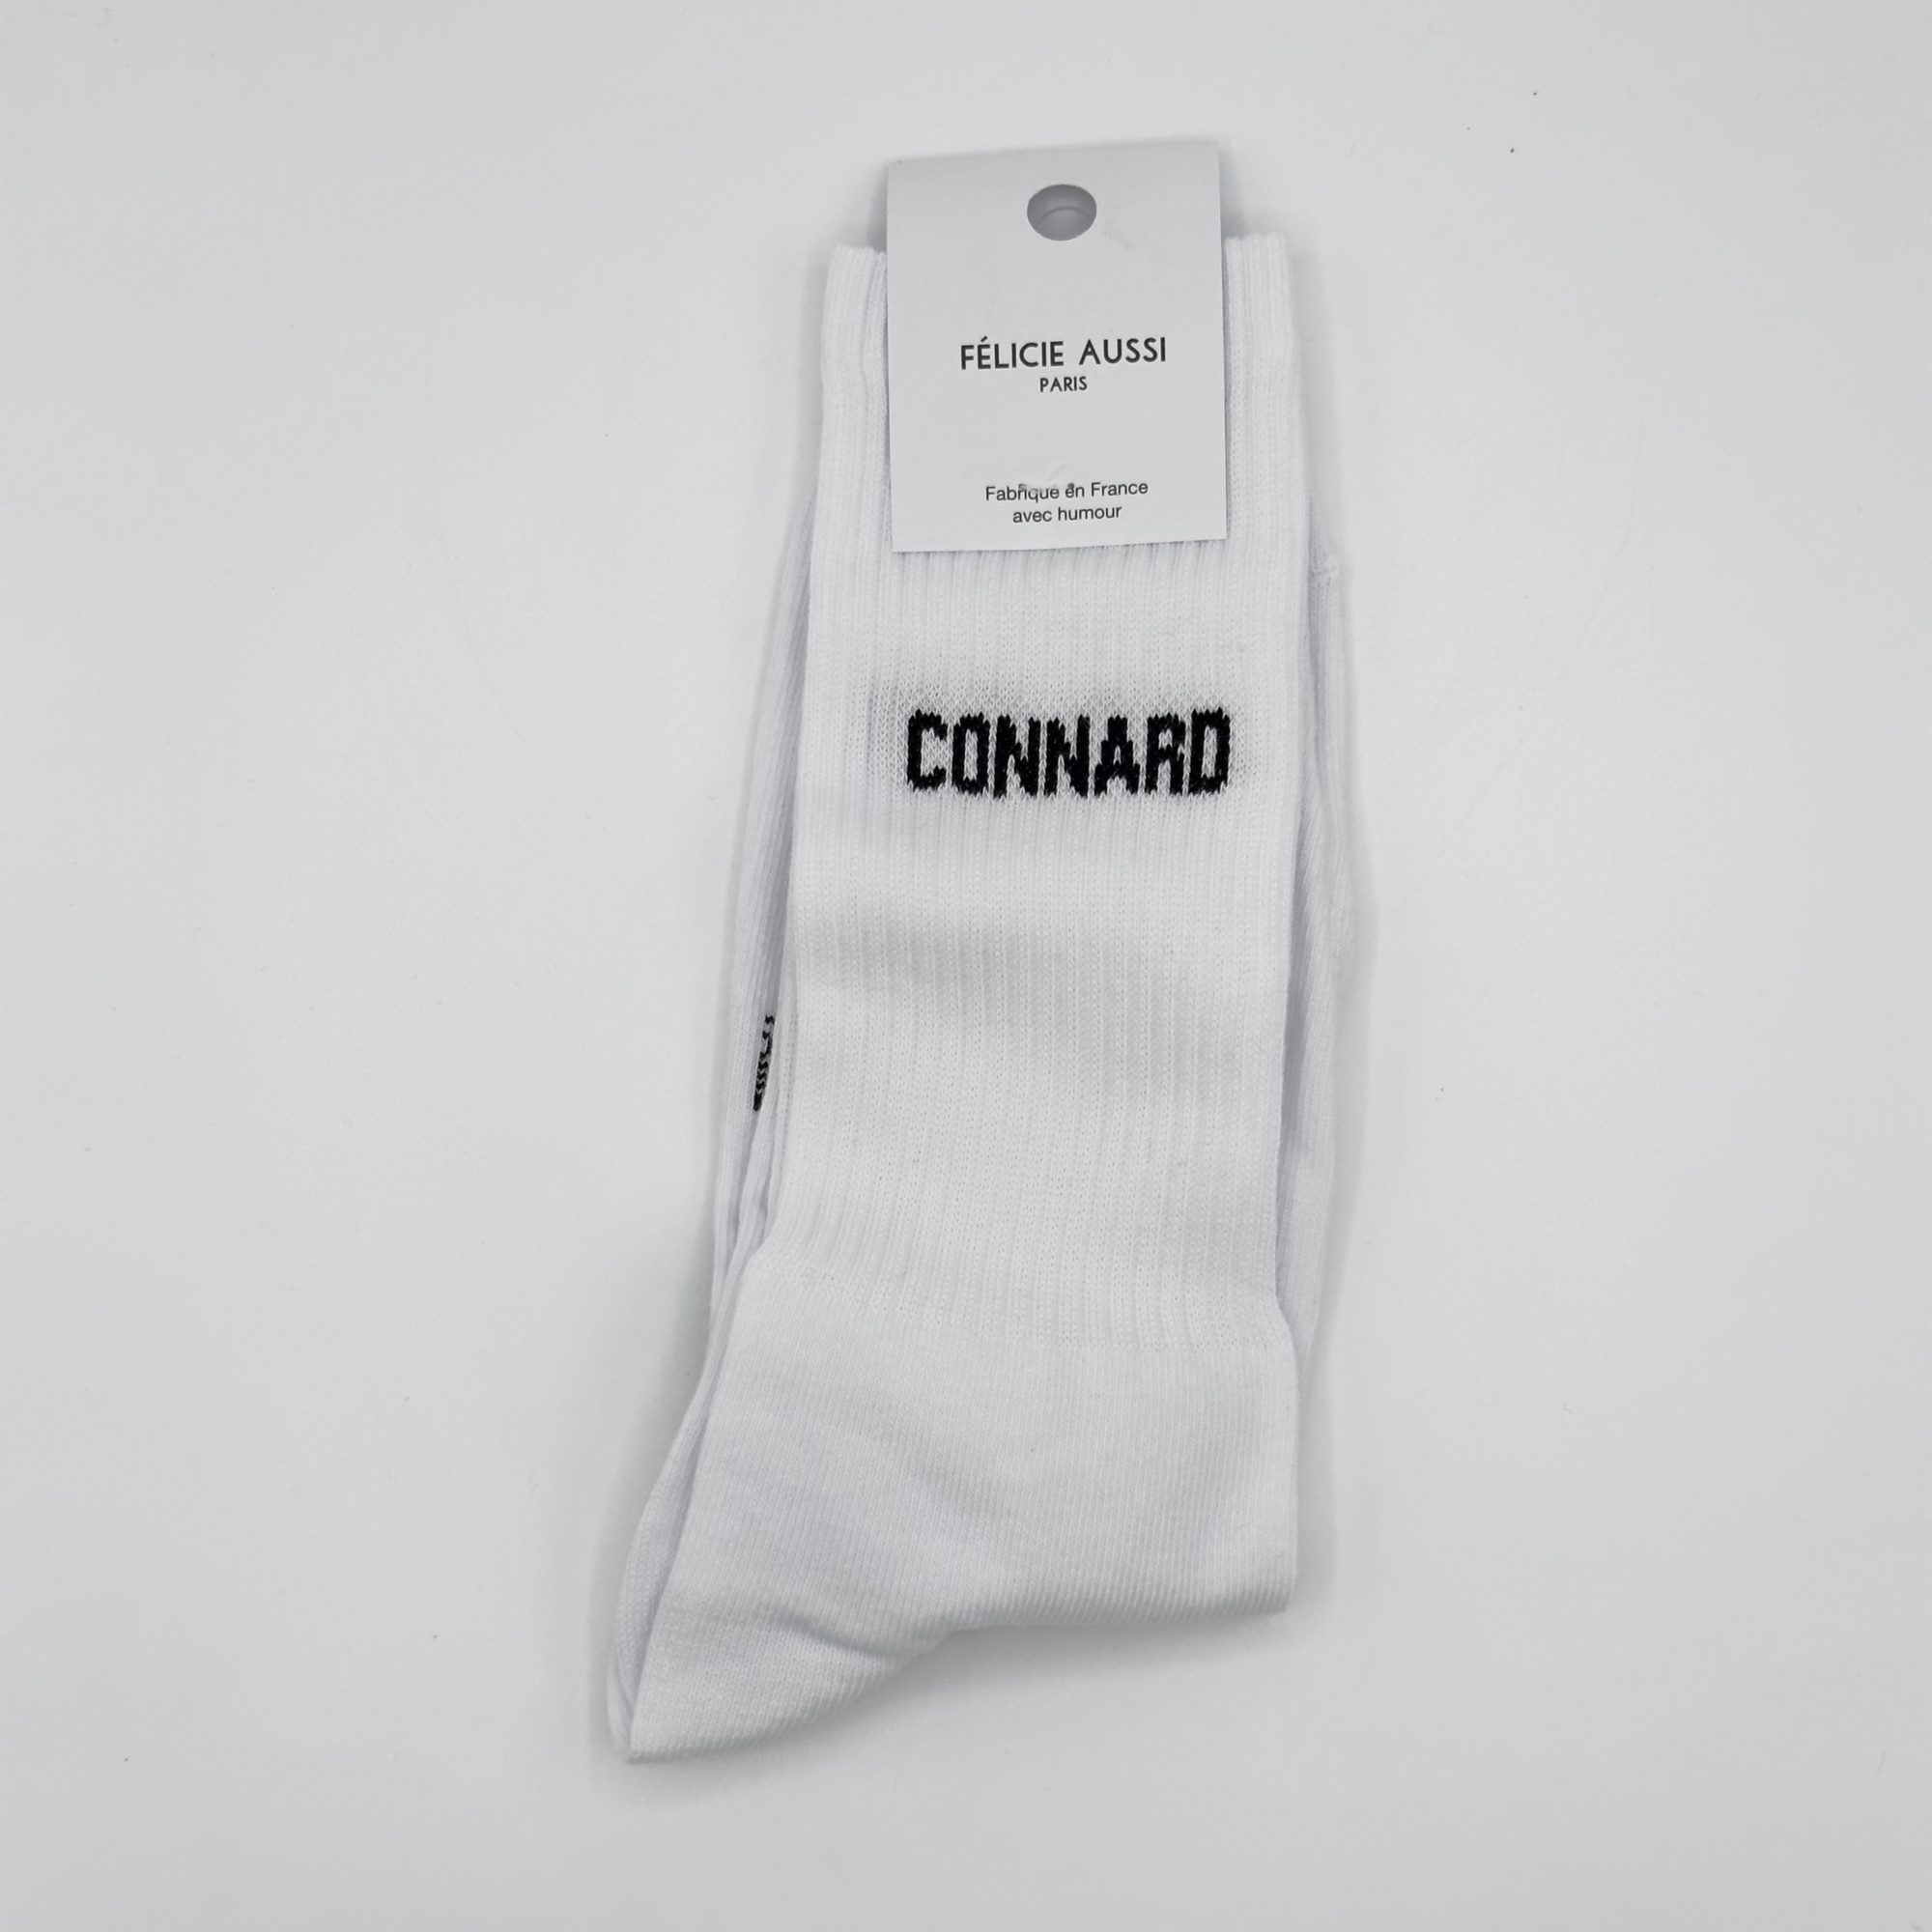 CHAUSSETTES CONNARD BLANCHES Taille : 40/45 - FÉLICIE AUSSI